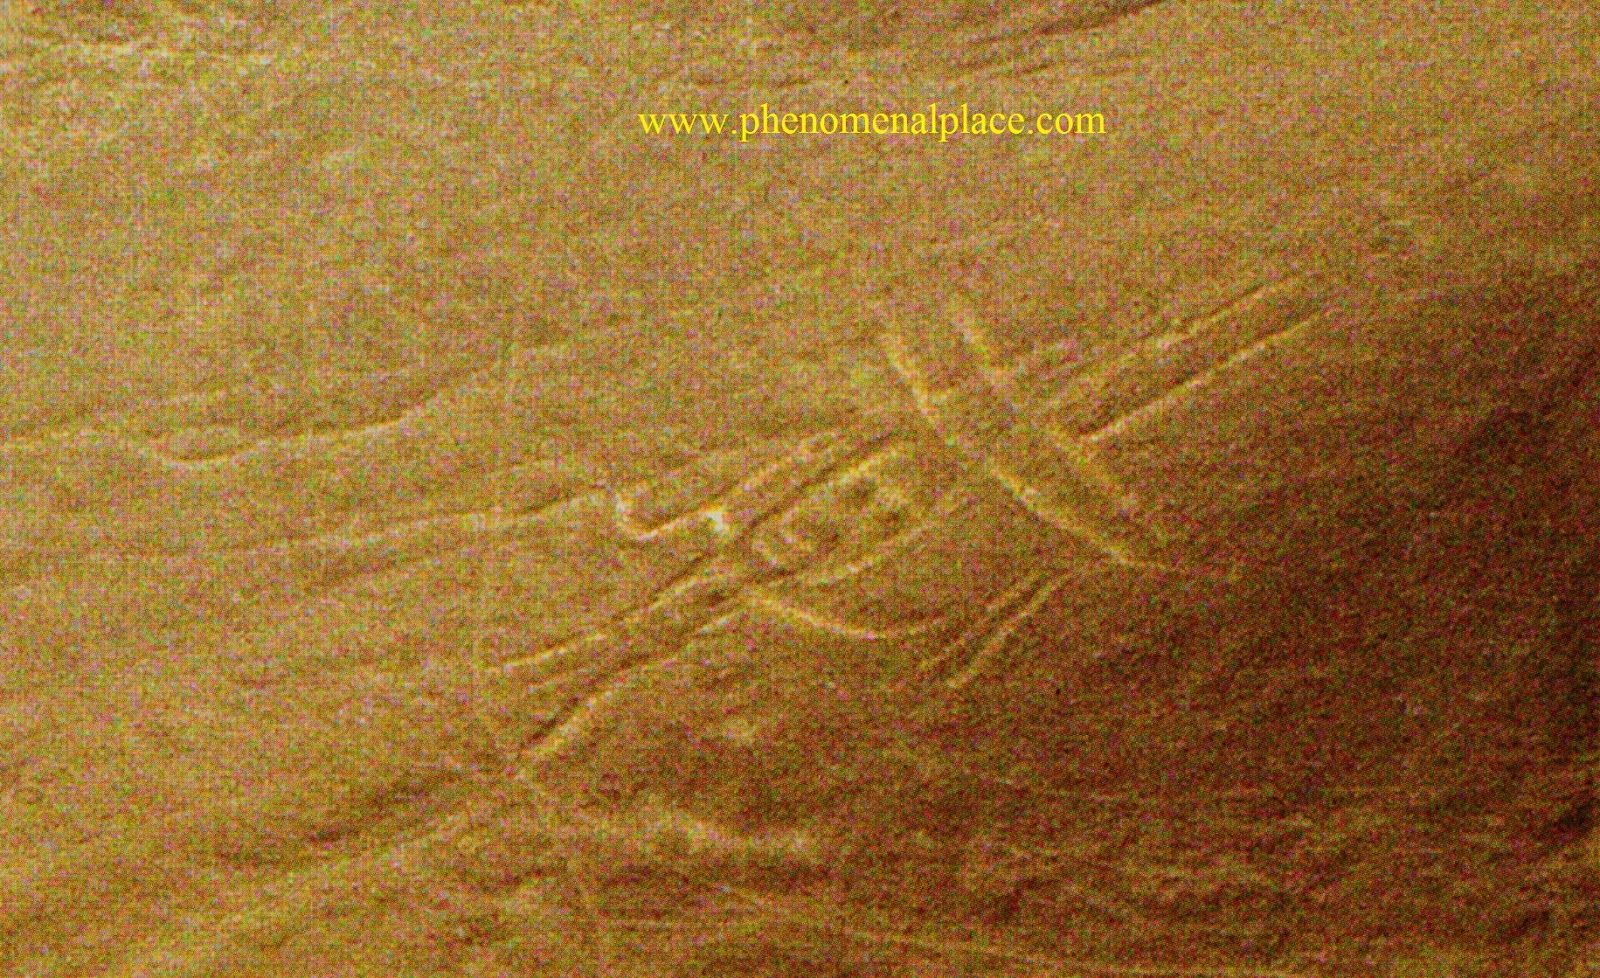 Asian nazca lines